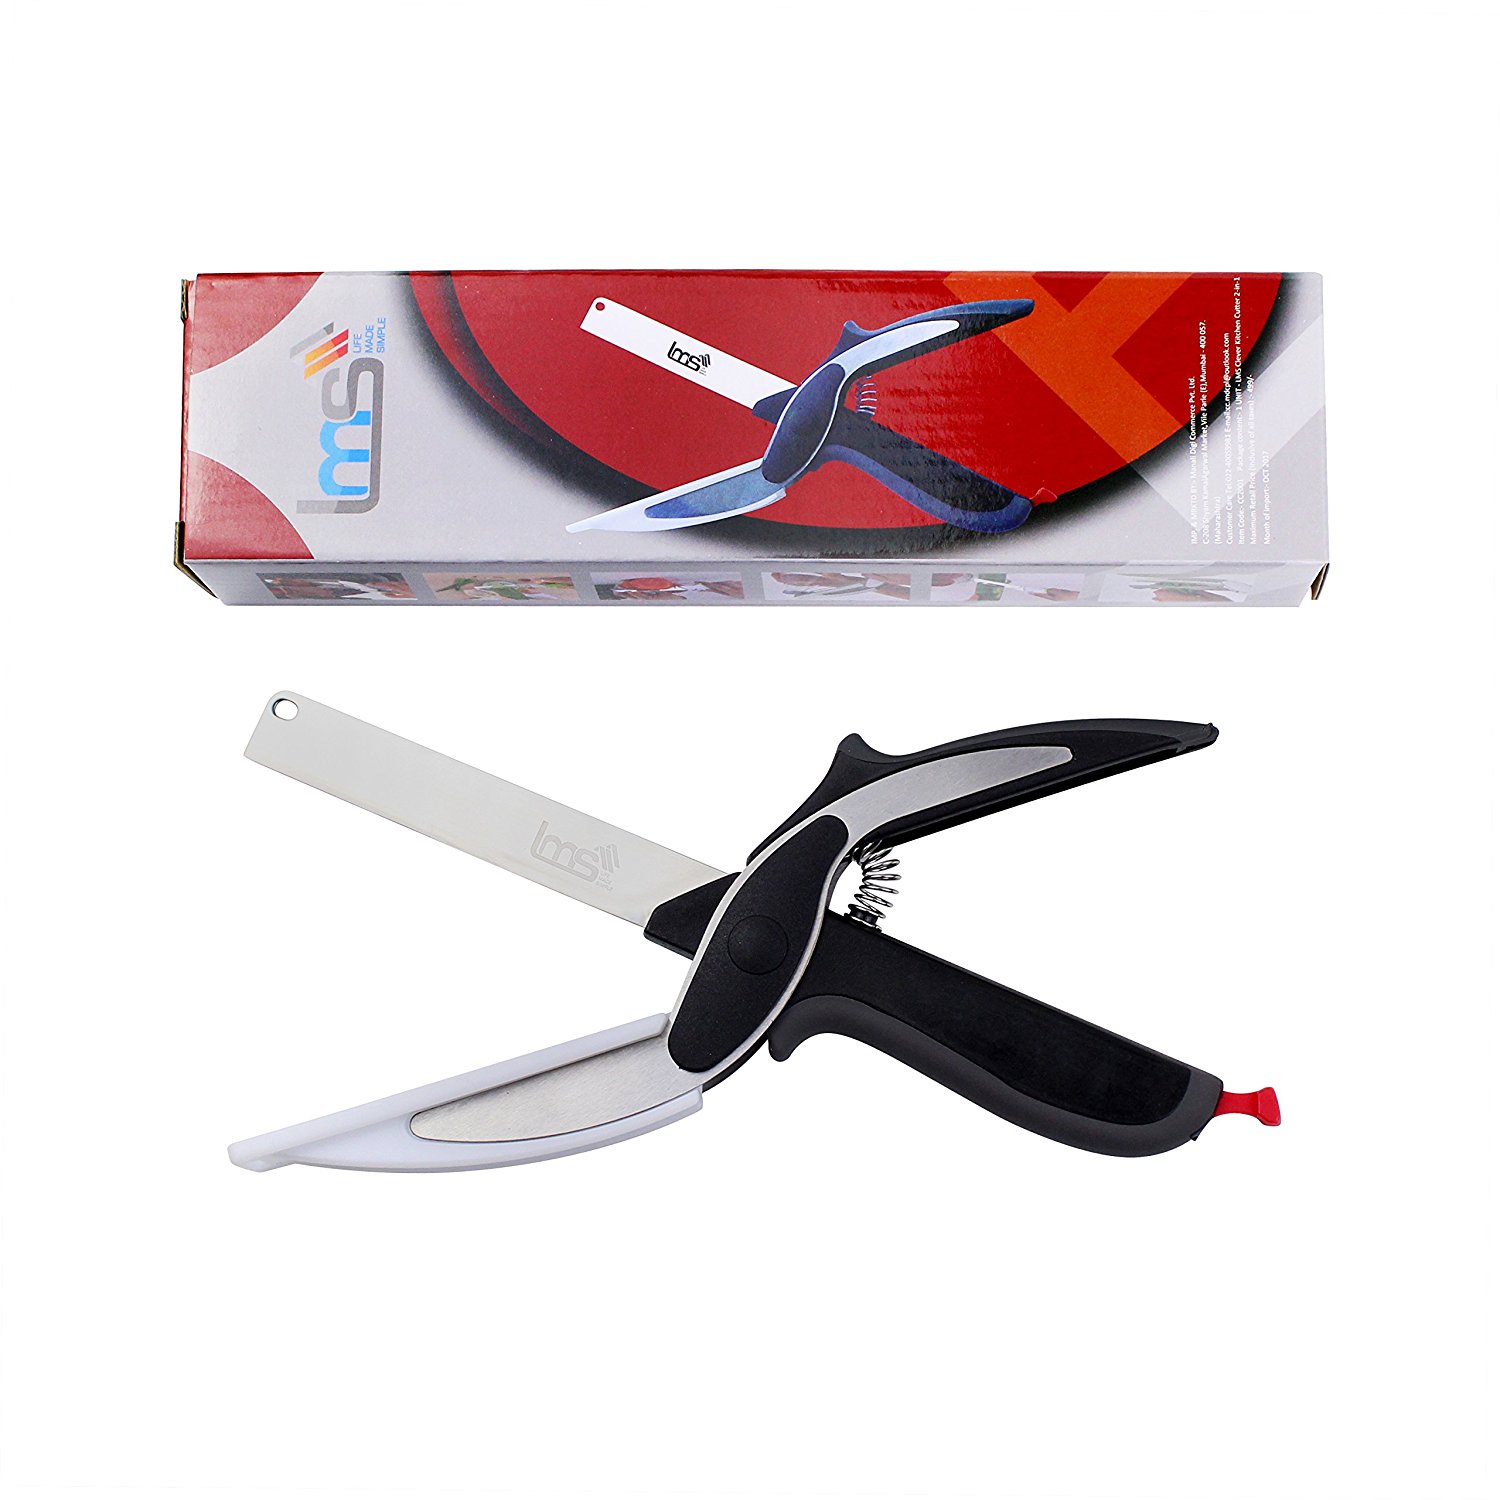 Buy LMS Stainless Steel 2-in-1 Vegetable and Fruit Chopper, Multicolour for Rs 88 only